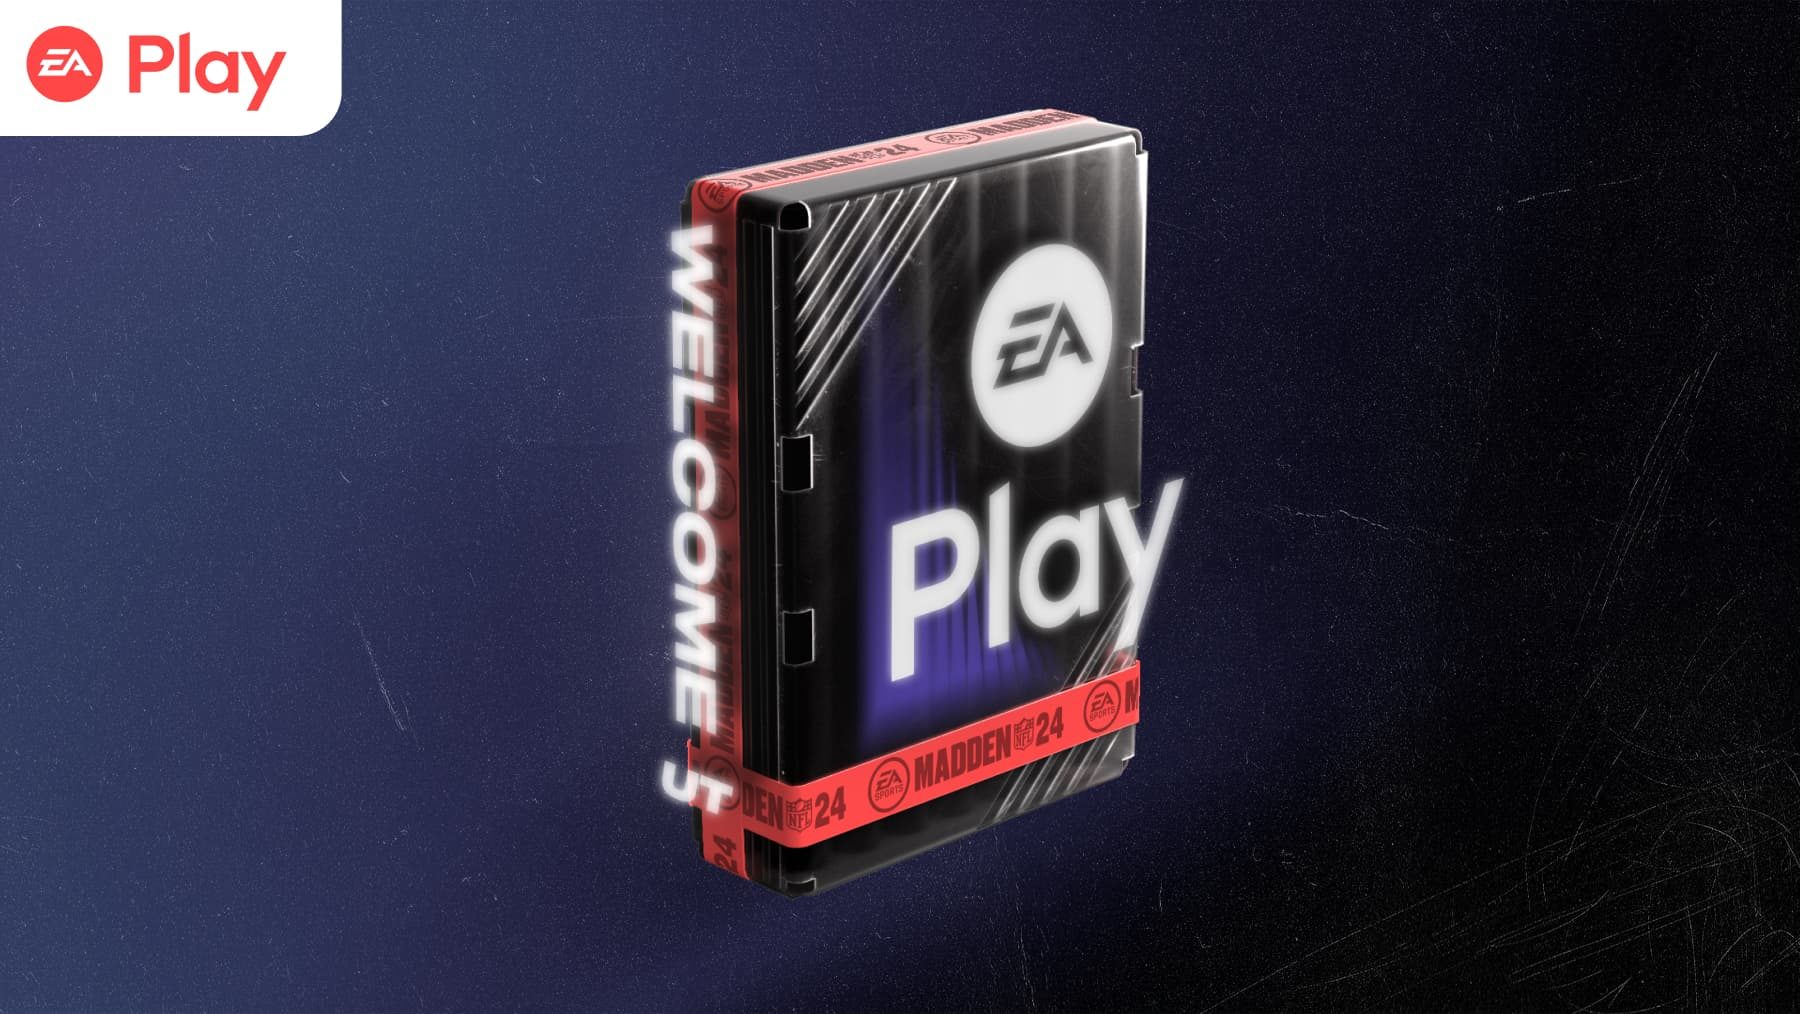 Welcome to EA Play